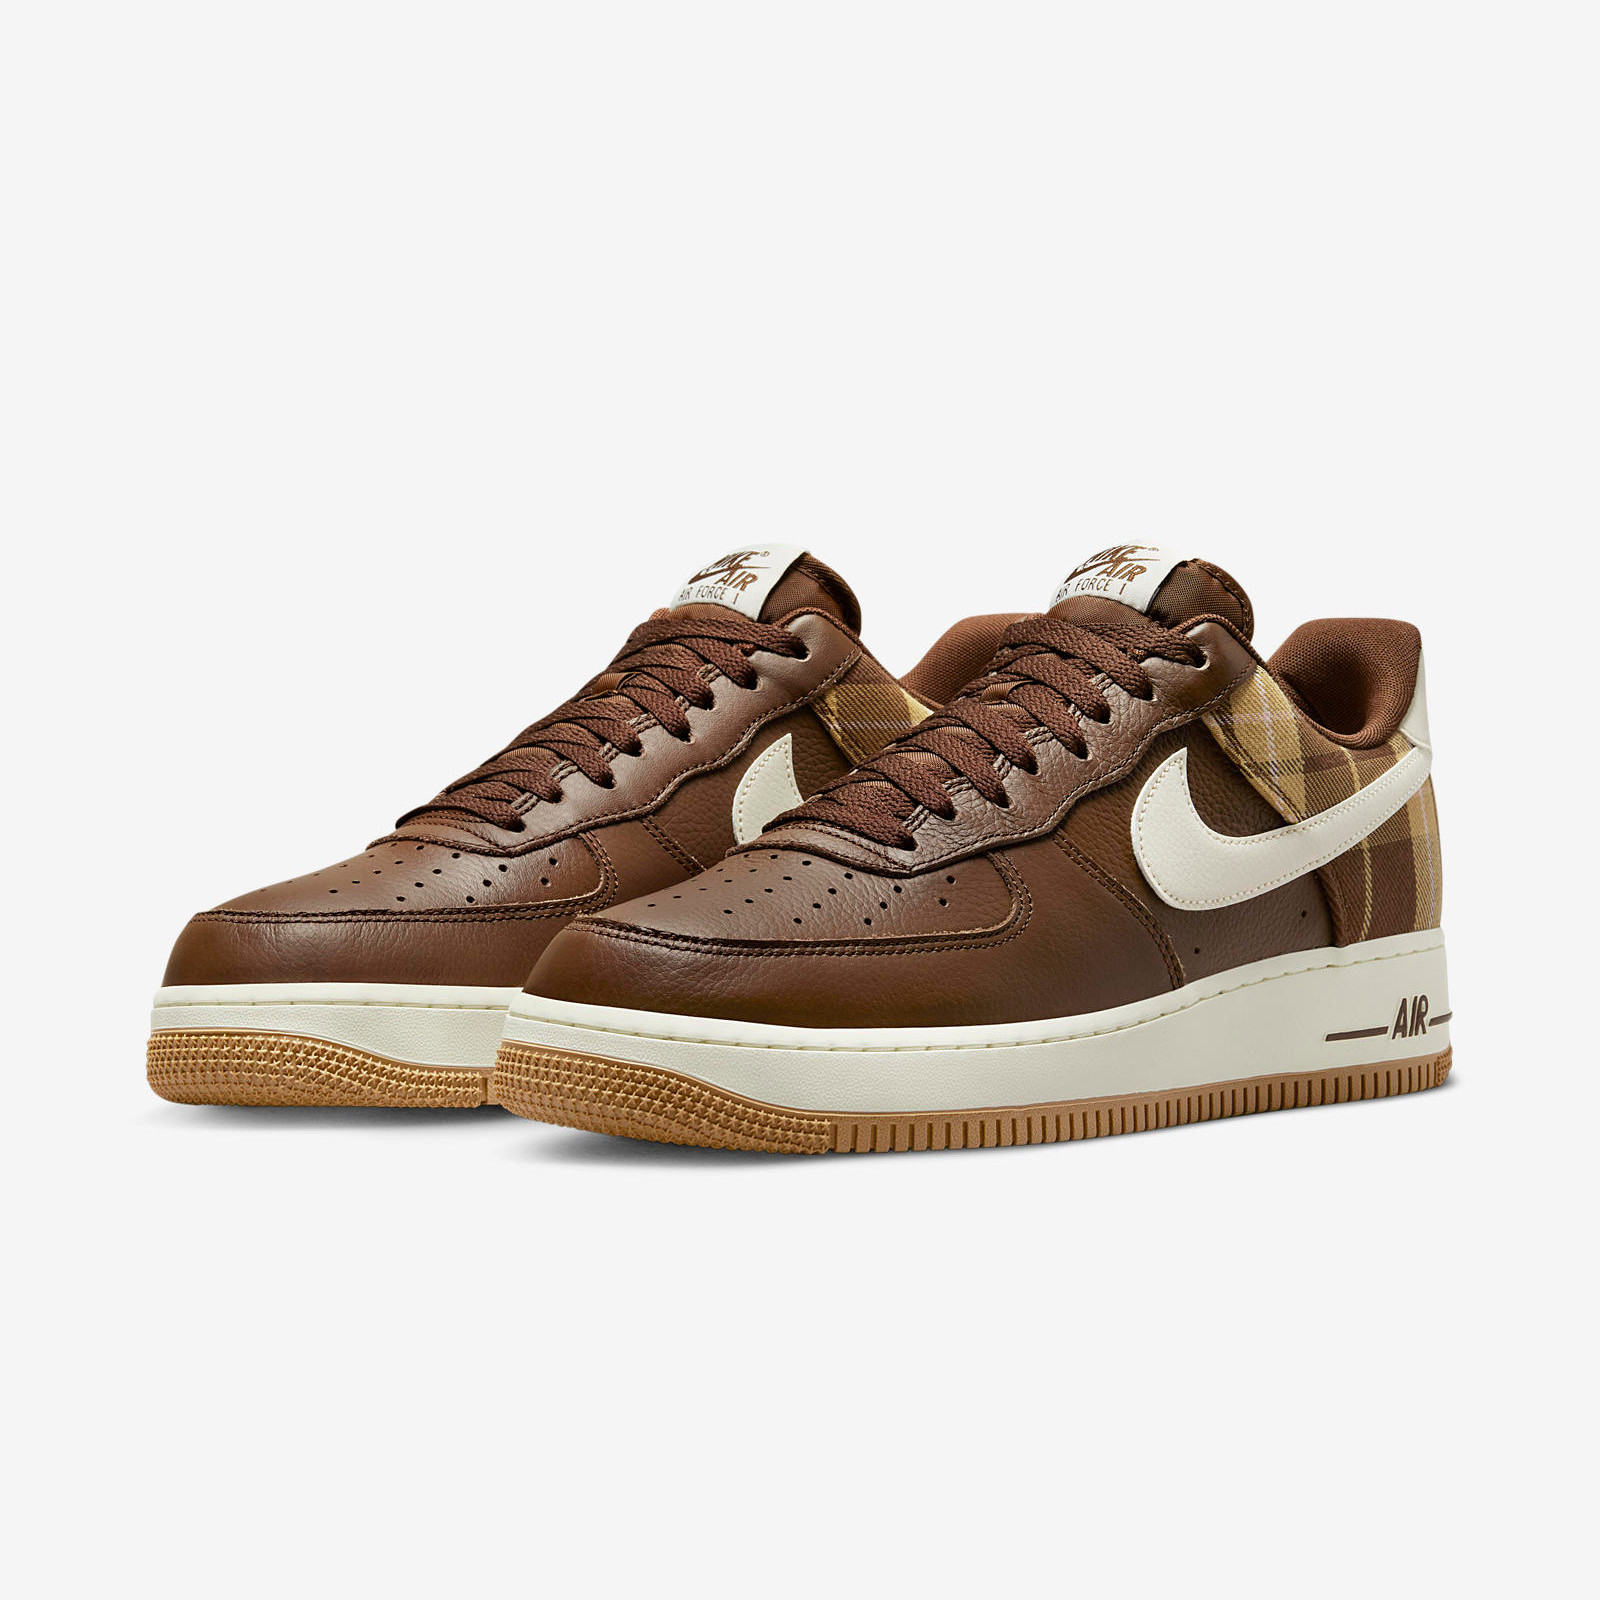 Nike Air Force 1 Low
« Cacao Wow »